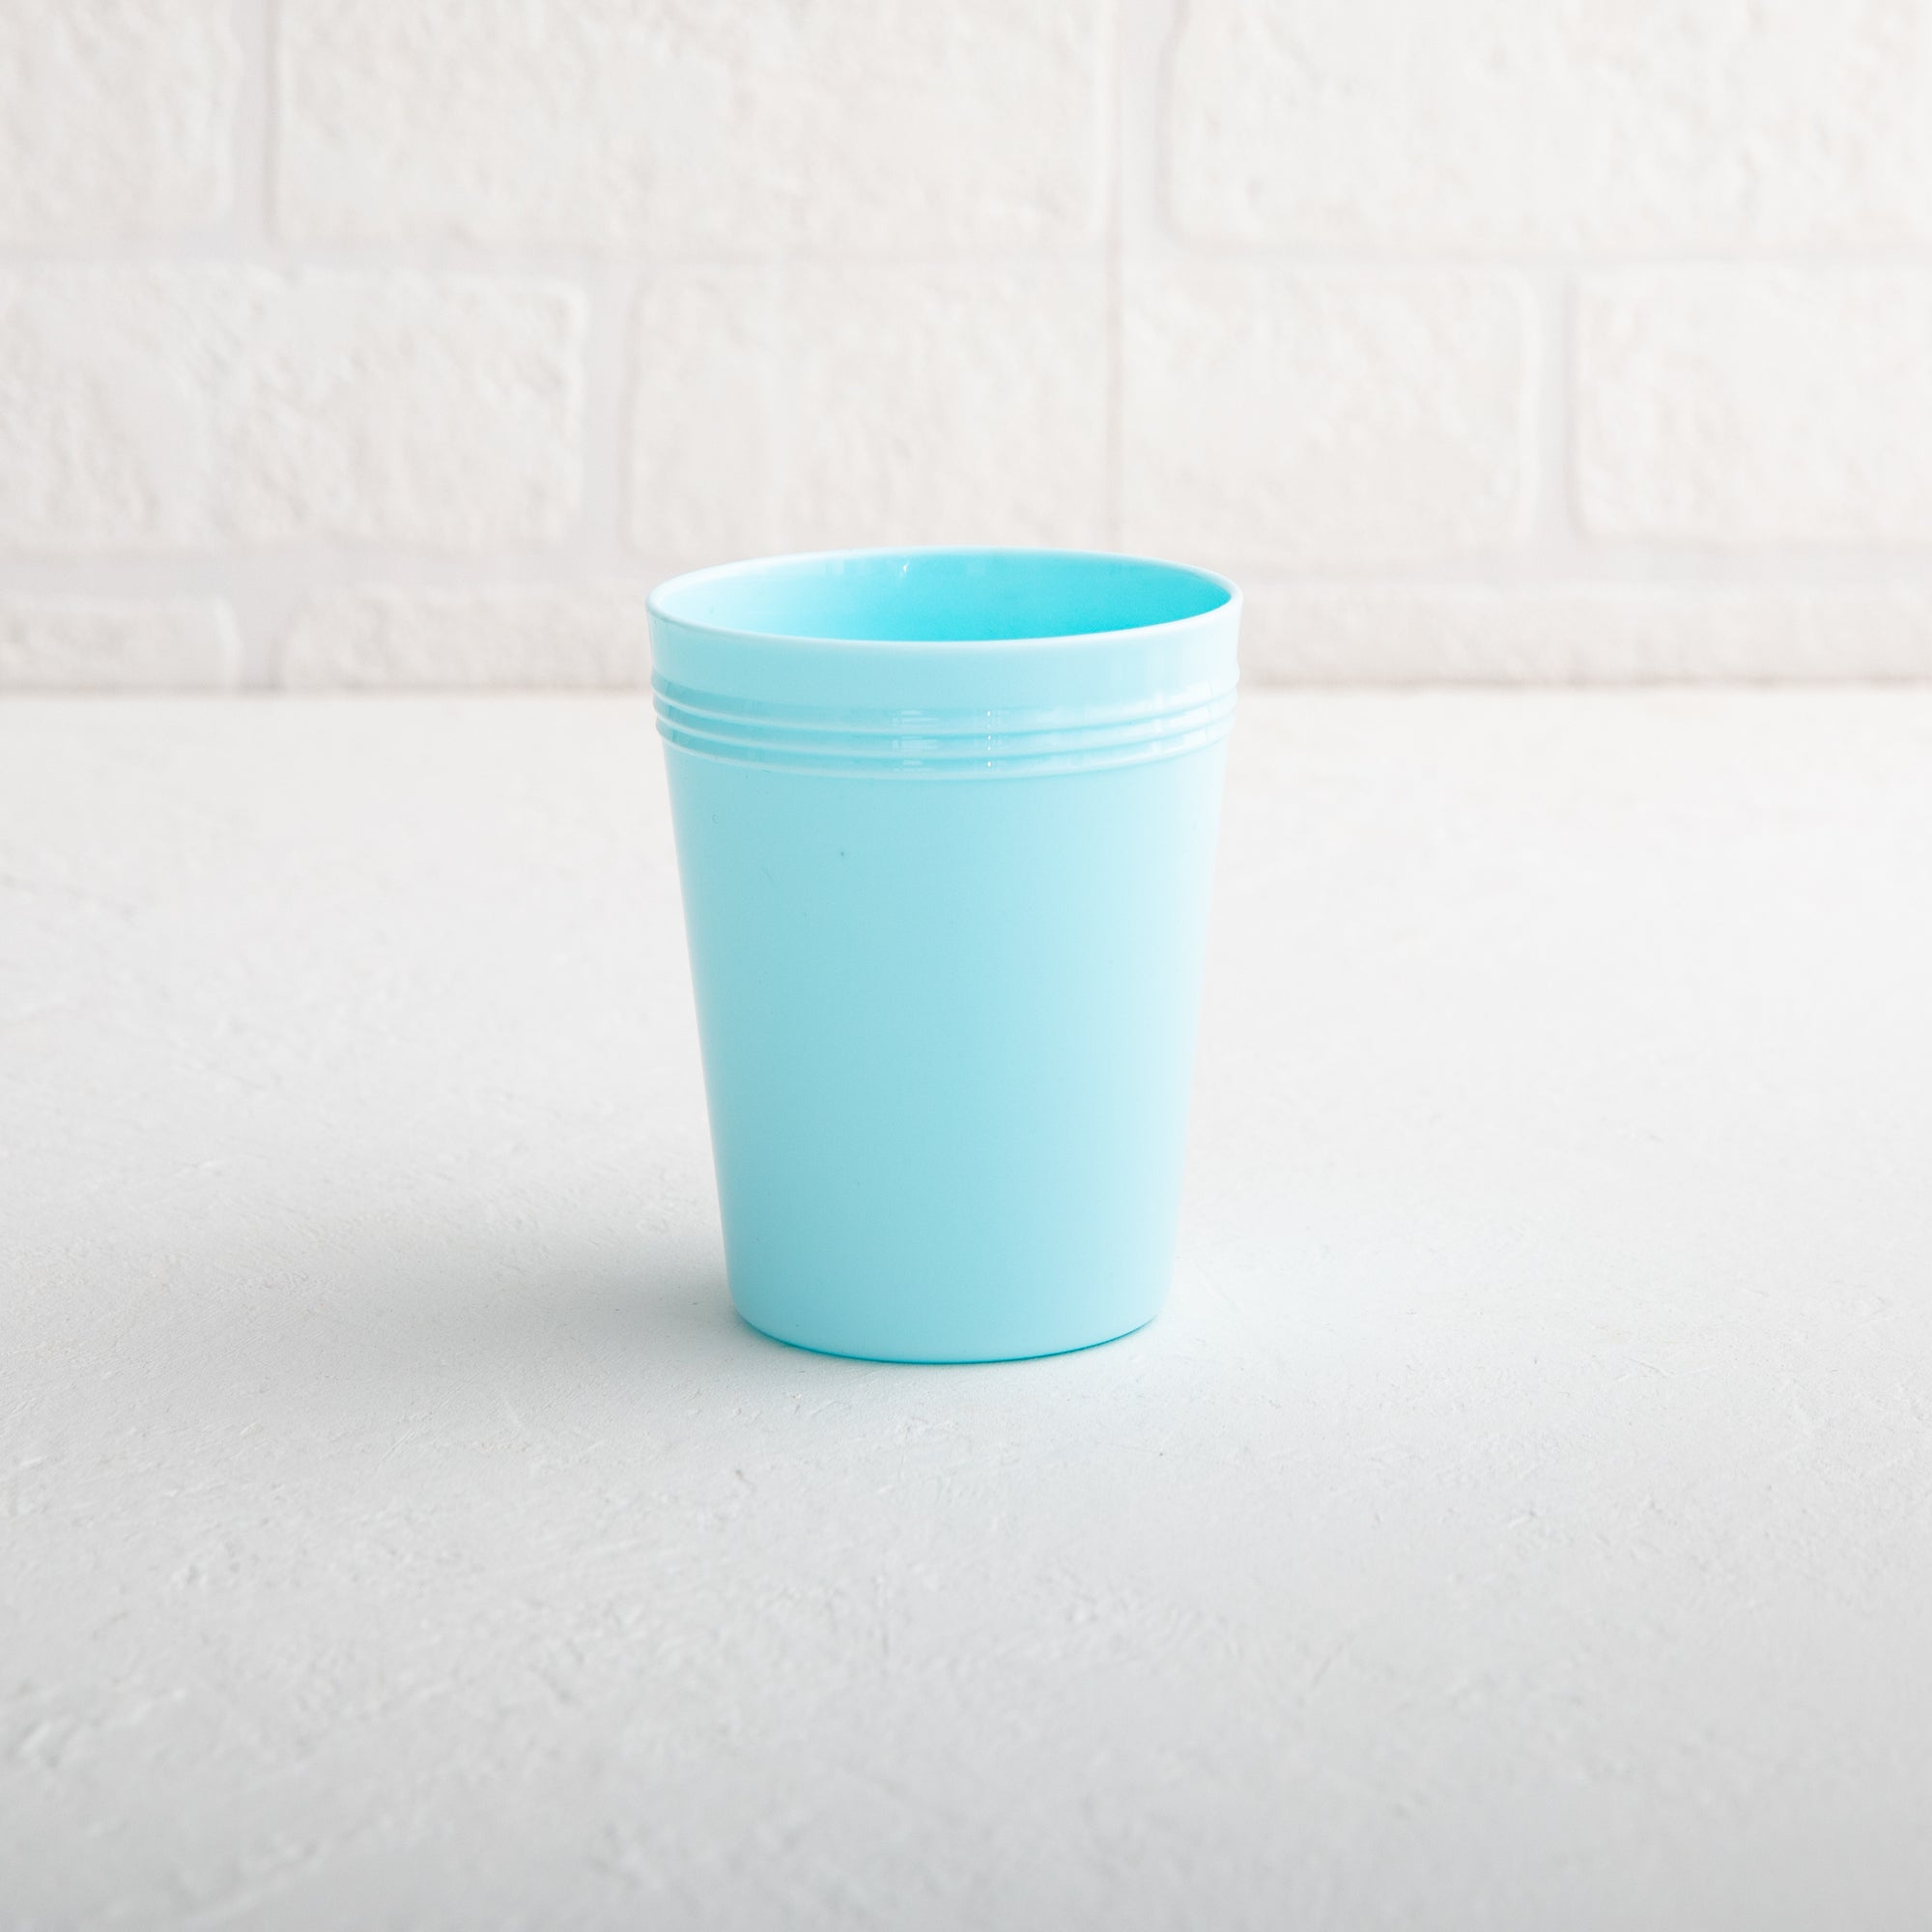 Recycled Plastic Cup for Toddlers - Eco-Friendly Cup - Nestor Avenue. Blue Cup.